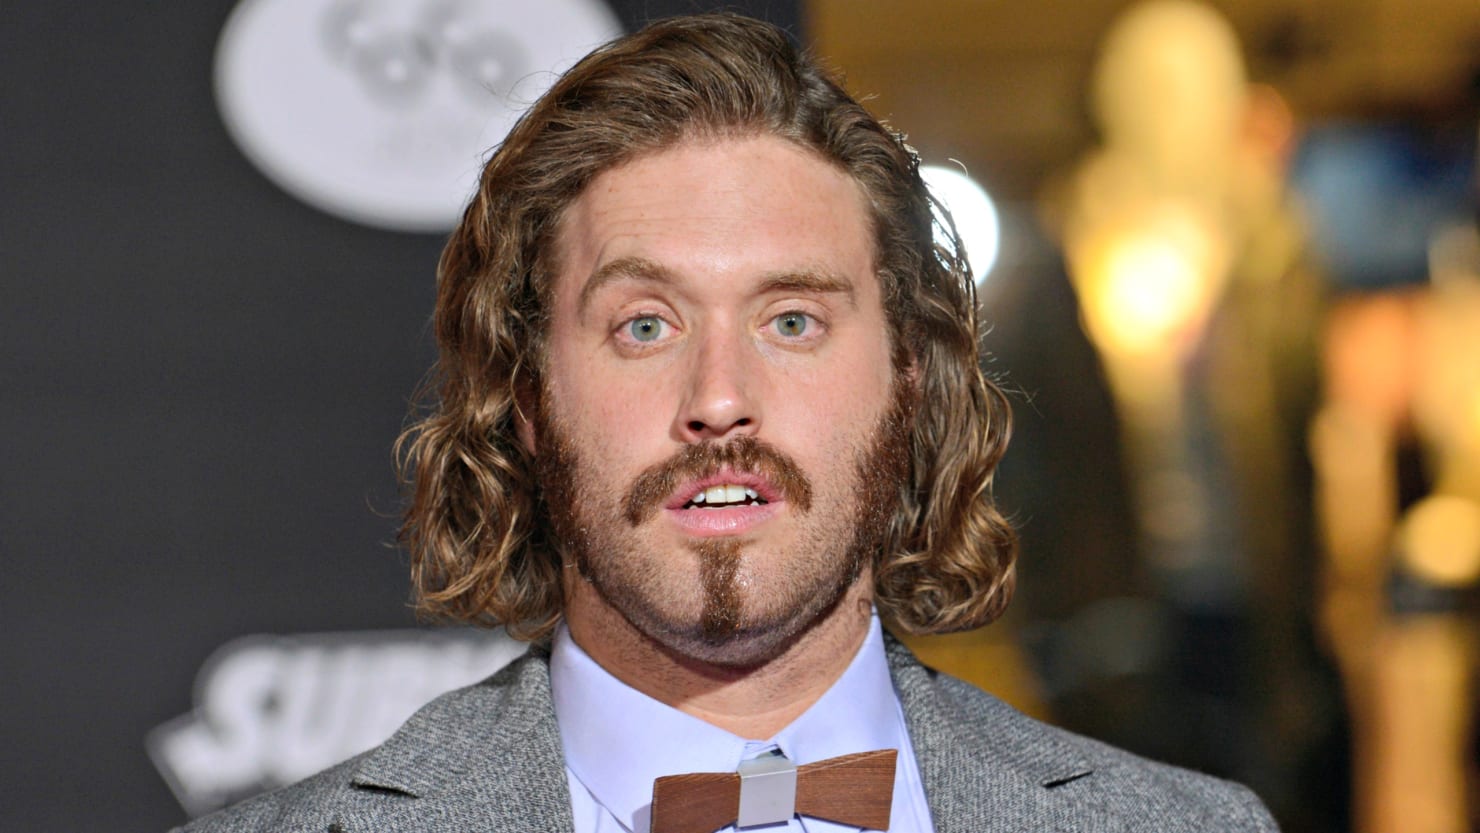 T.J. Miller Explains Why He’s Leaving ‘Silicon Valley’